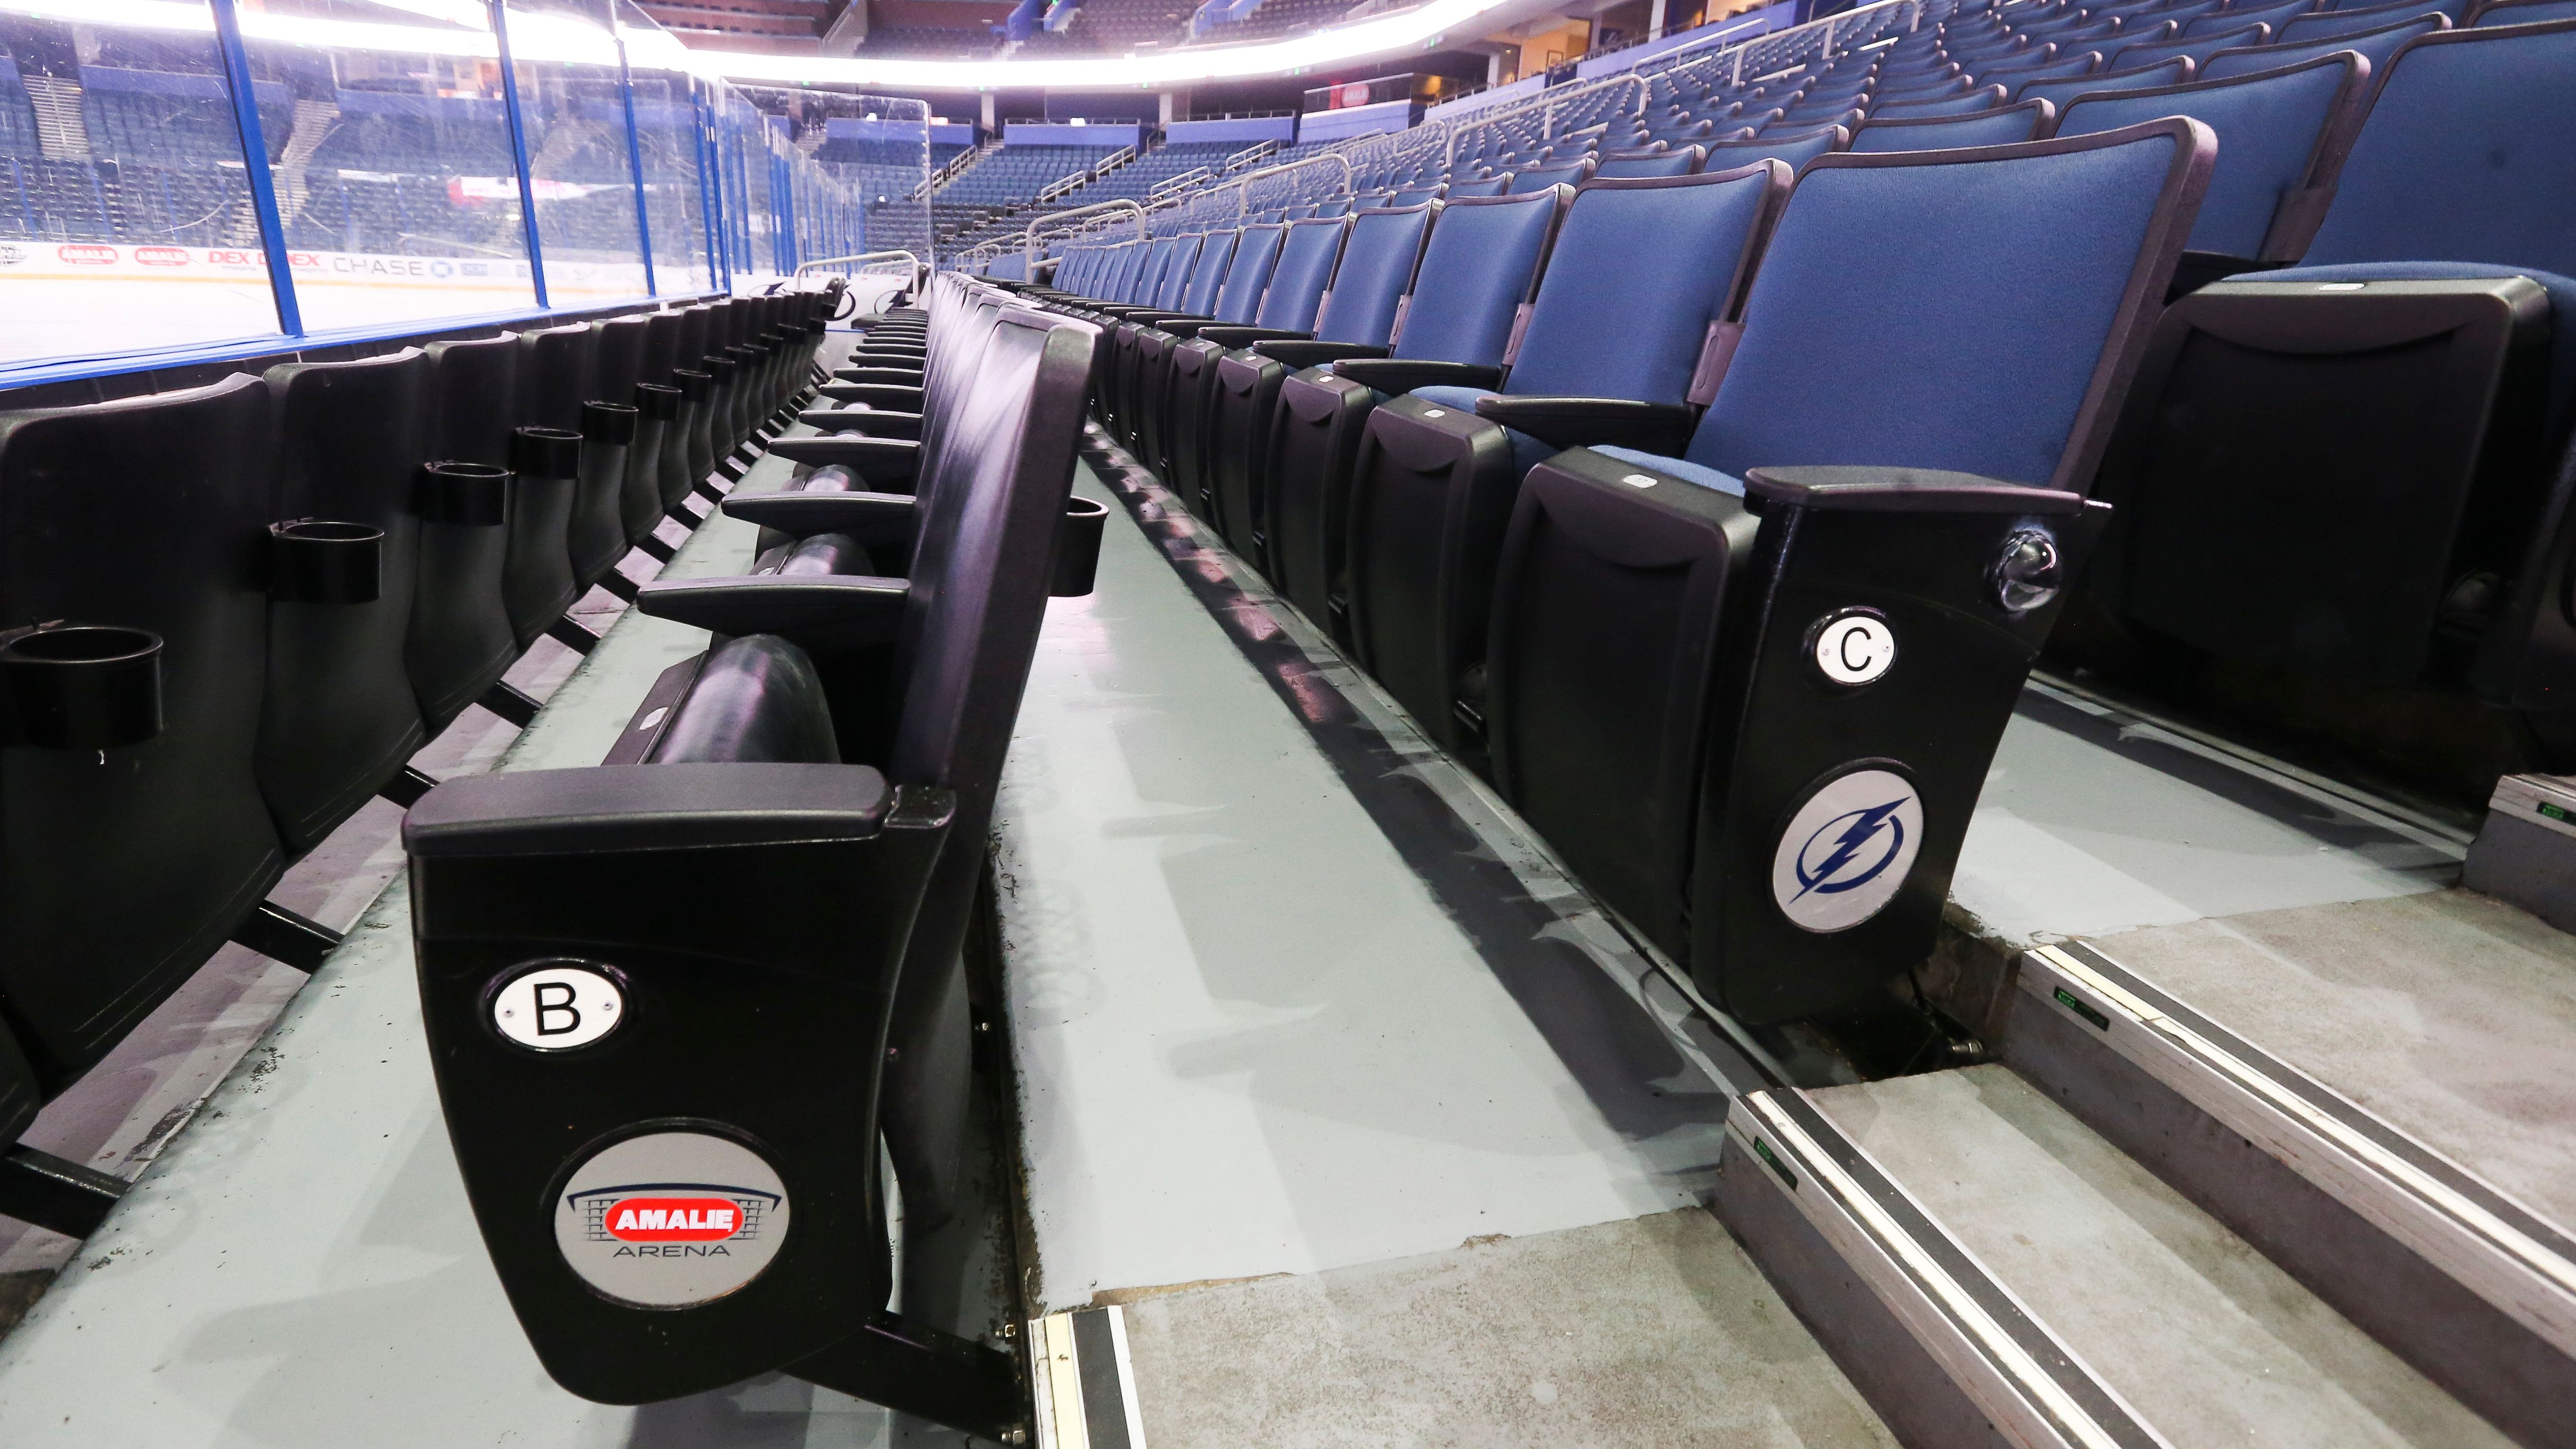 Lightning, Raptors games at Amalie Arena to be fanless due to